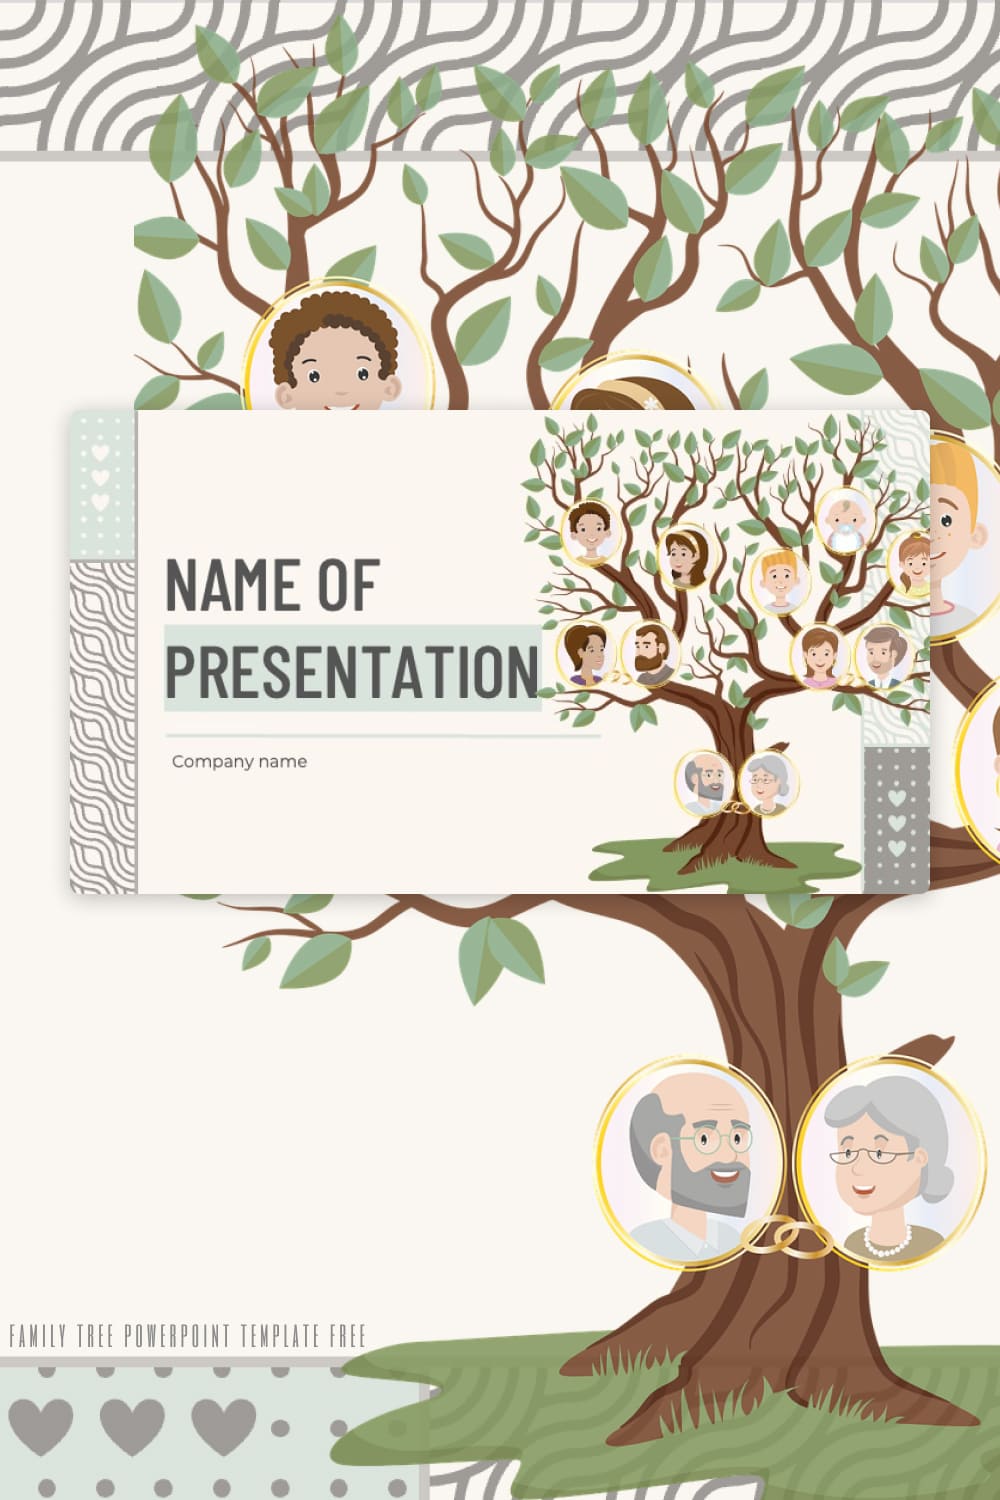 Family Tree Powerpoint Template Free Pinterest.